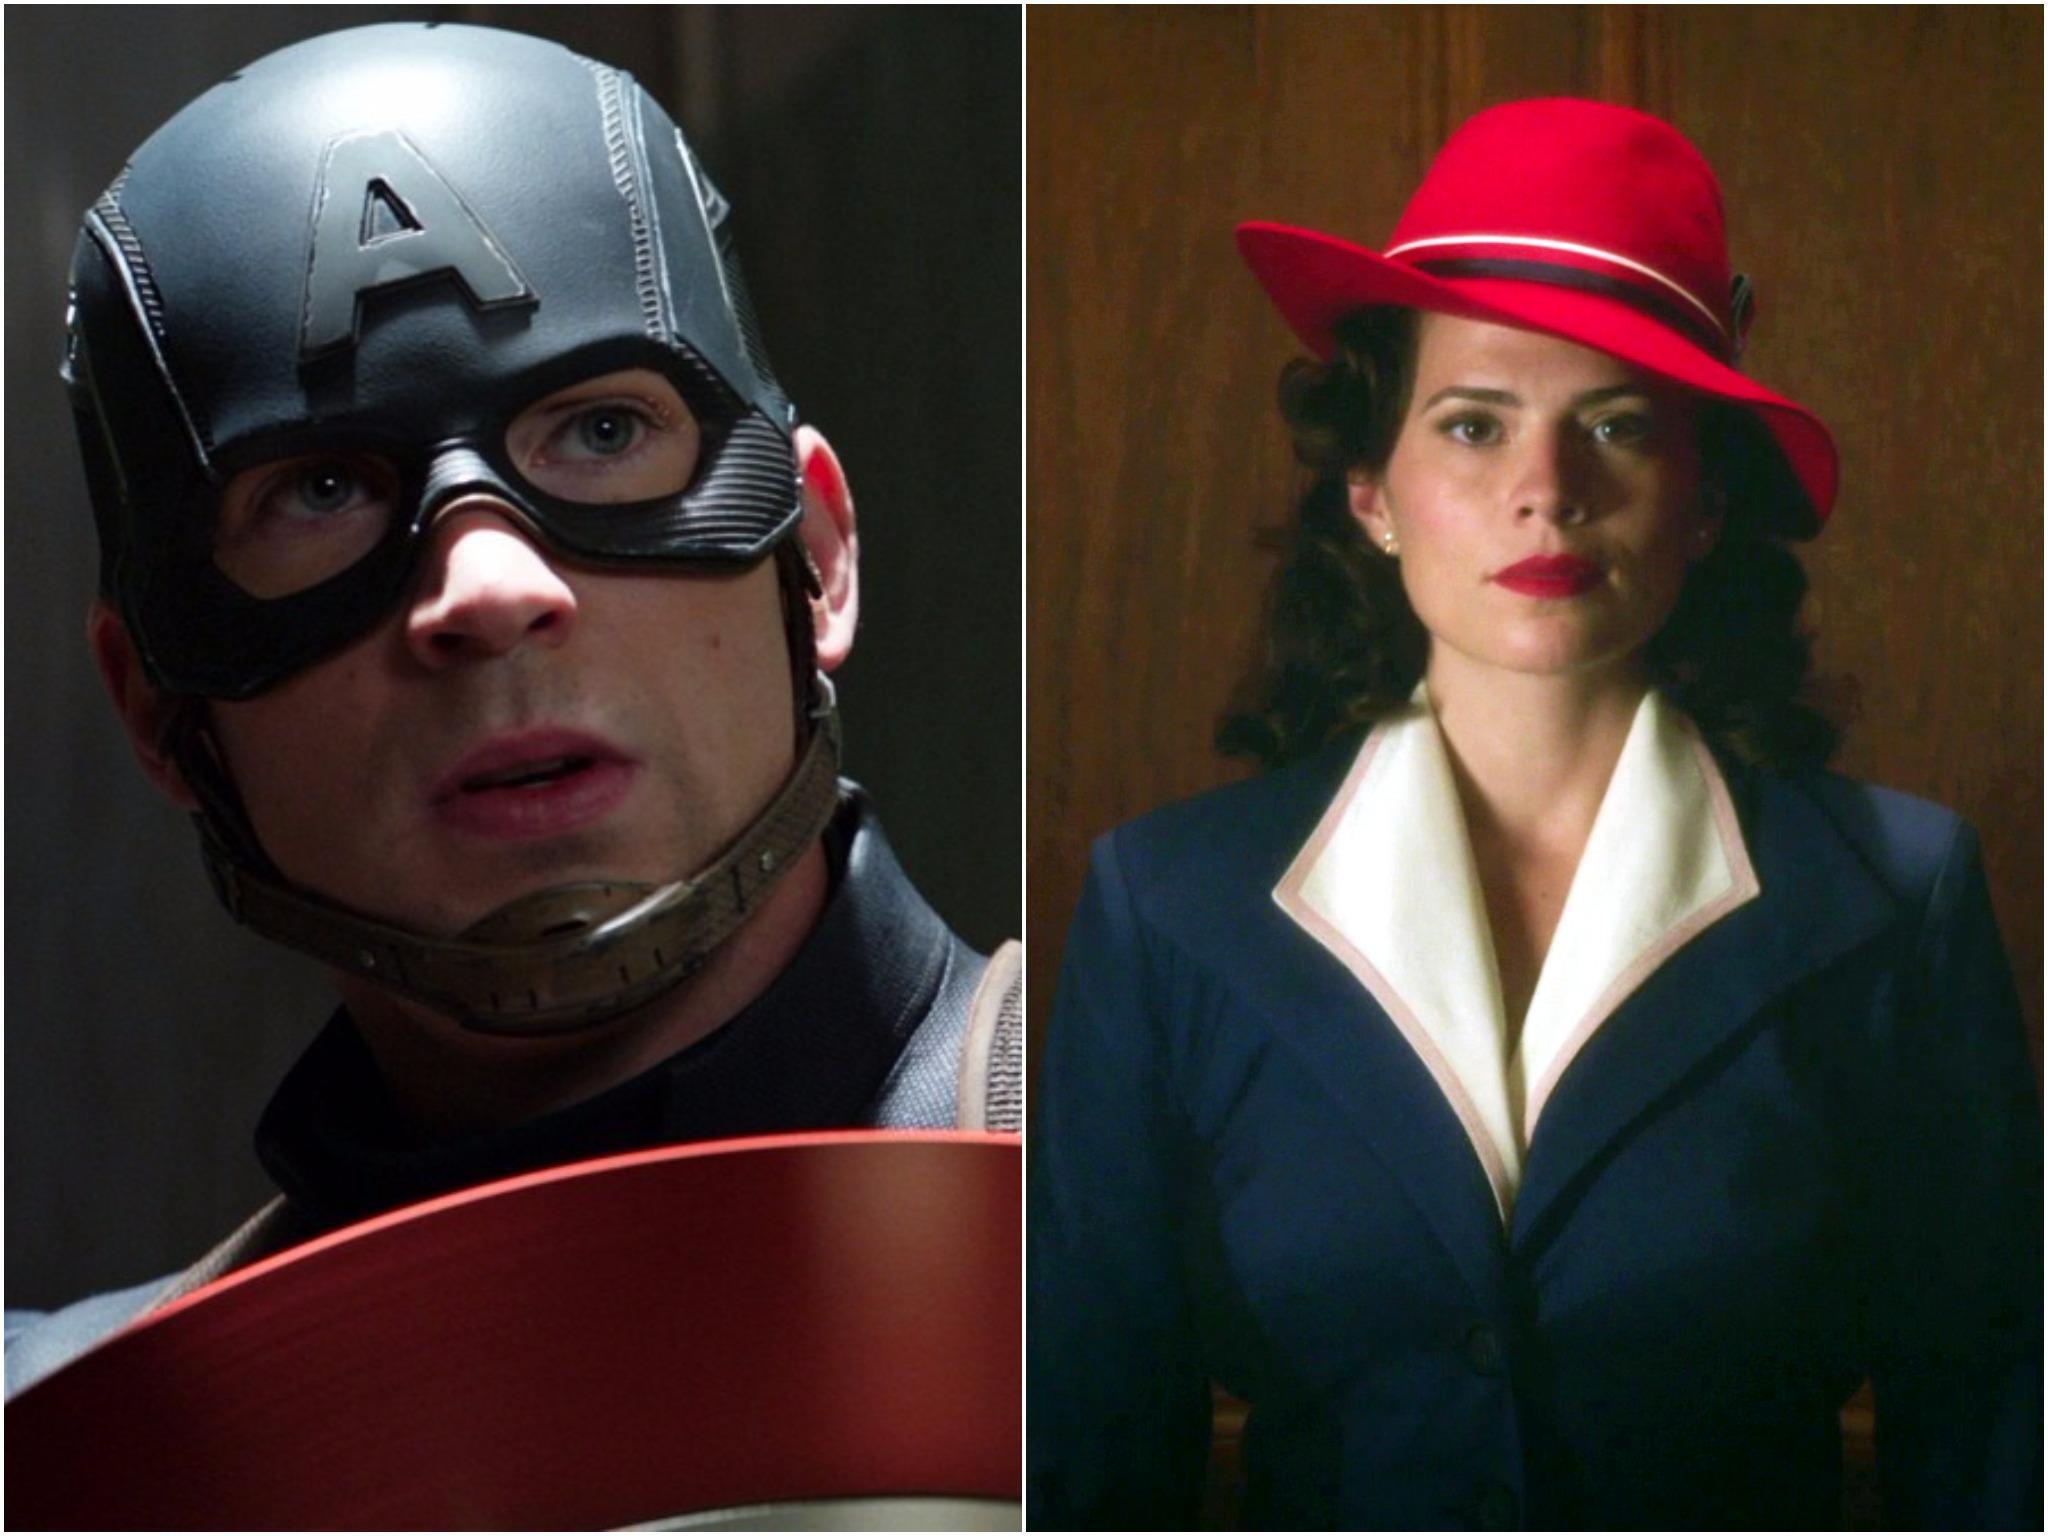 Captain America: Civil War and the Agent Carter TV series